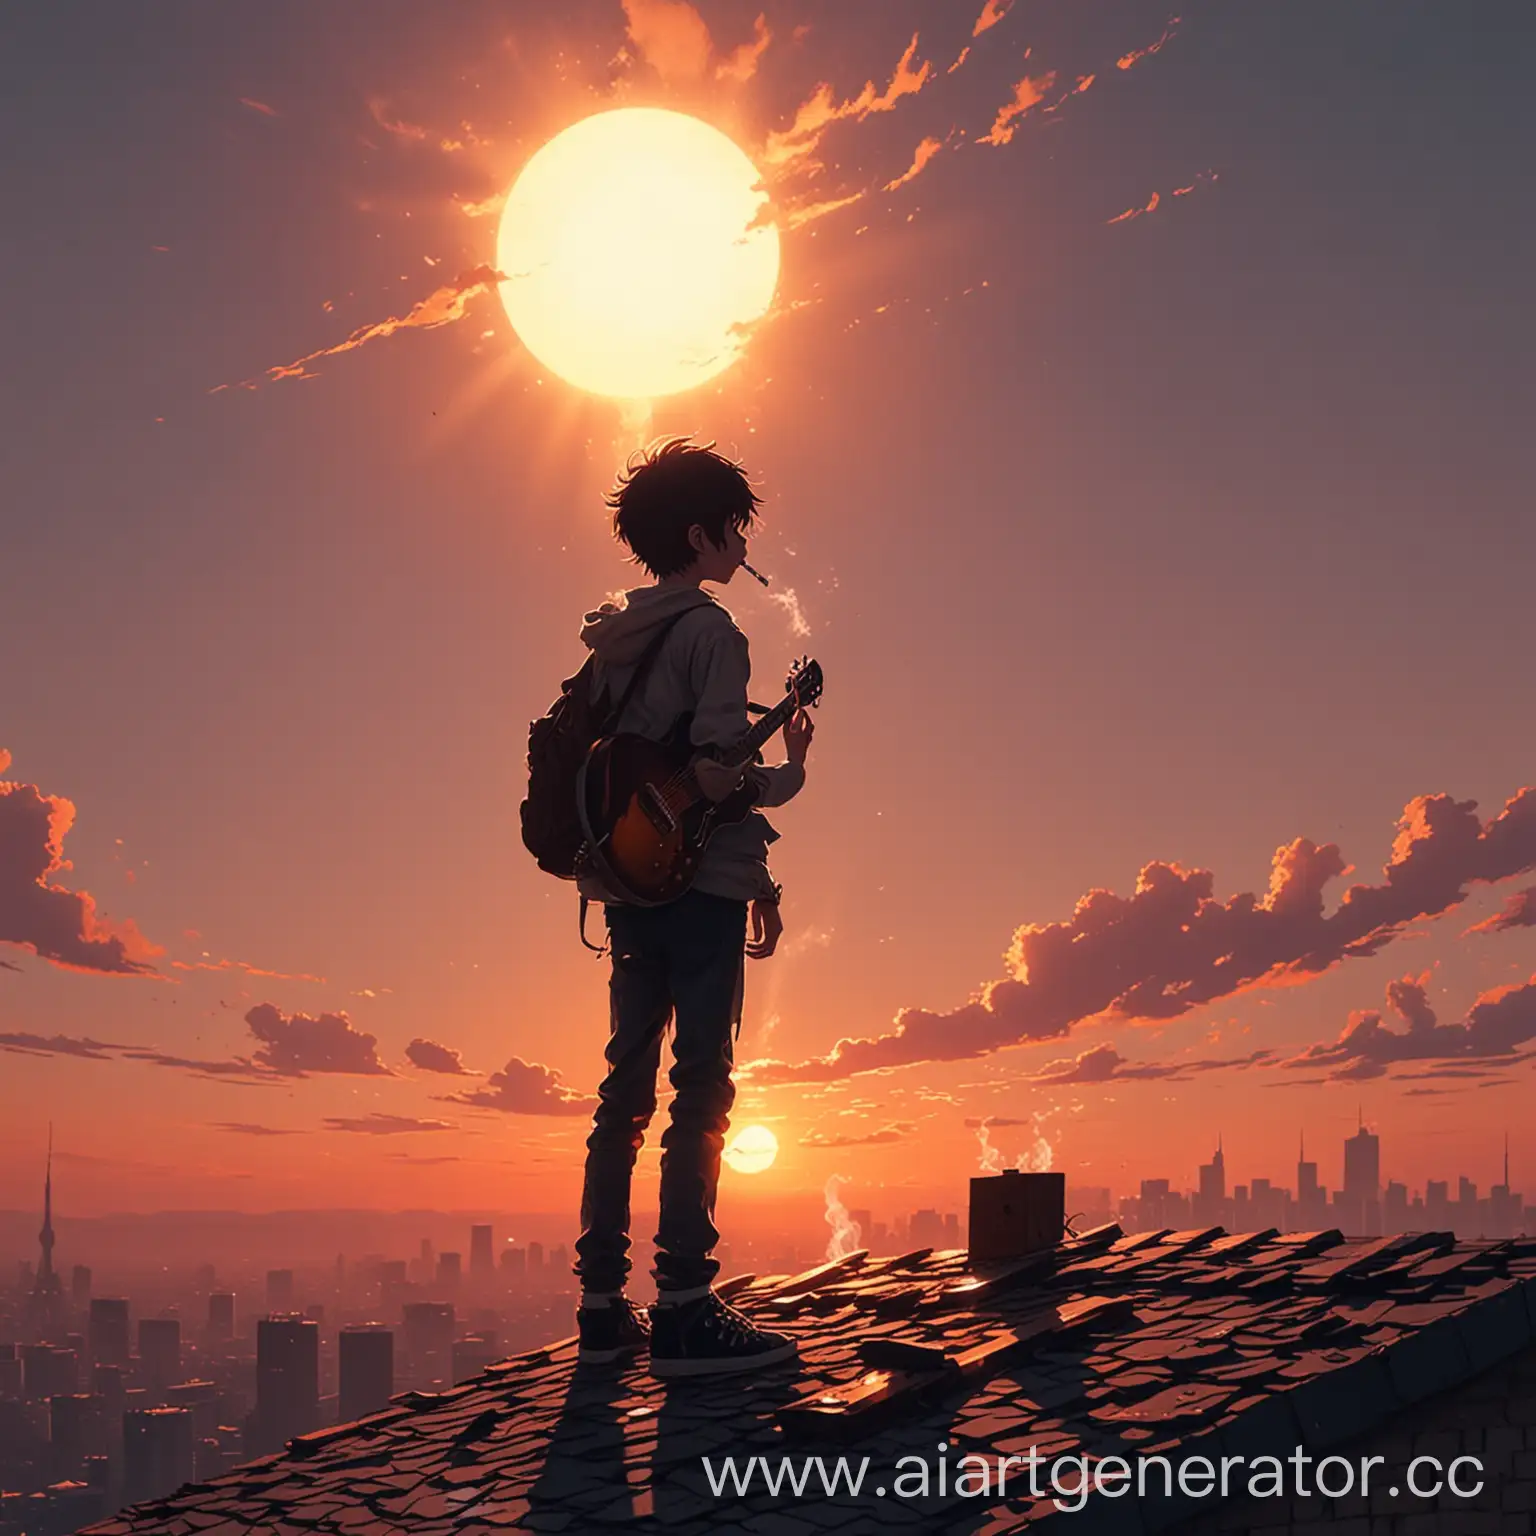 Rebellious-Youth-Breaks-Guitar-on-Rooftop-at-Sunset-Anime-Pixel-Art